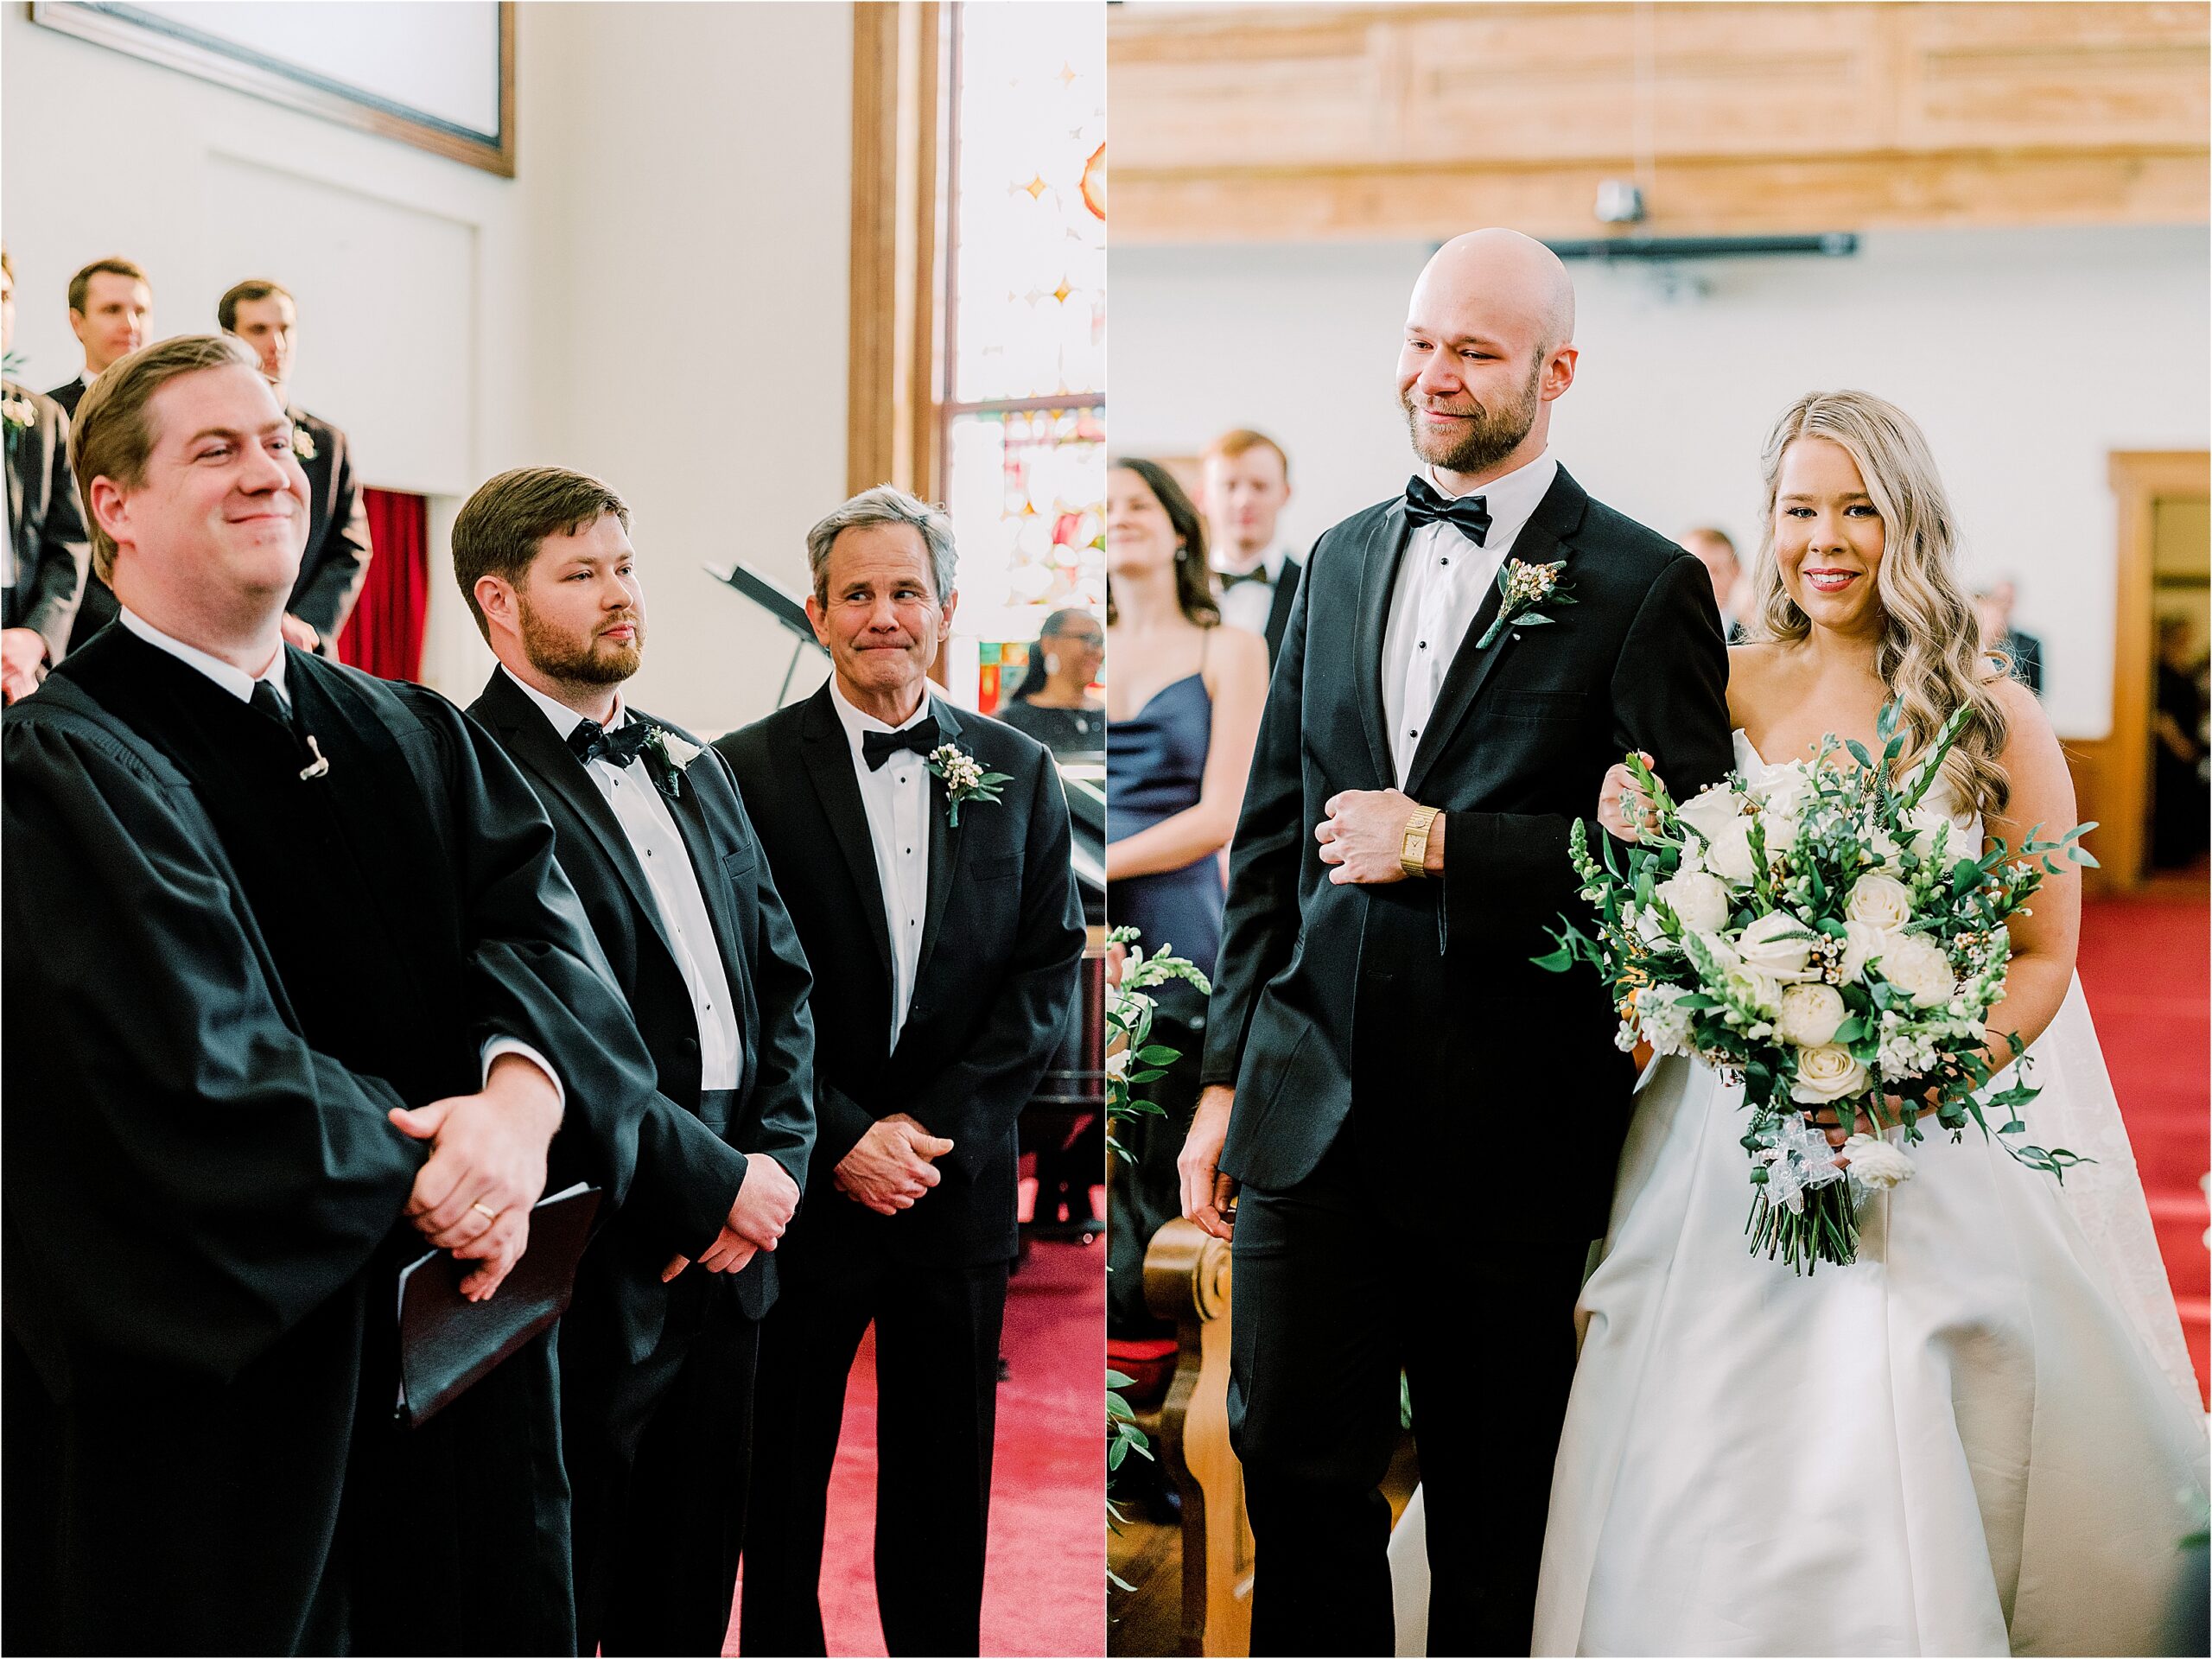 Groom in black tuxedo sees bride for the first time in church.